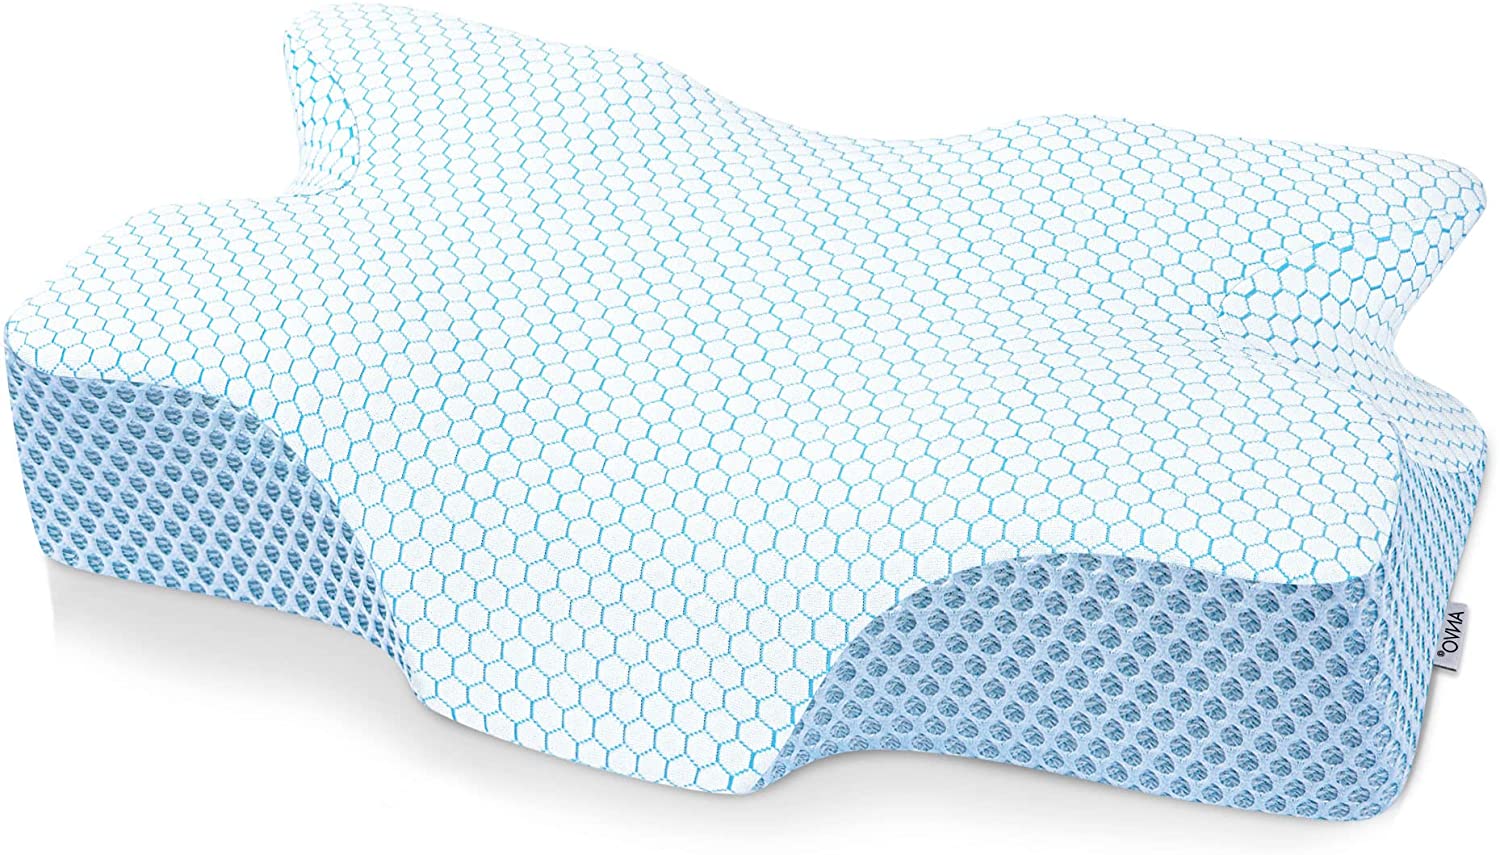 Anvo Cervical Memory Foam Pillows for Neck Pain